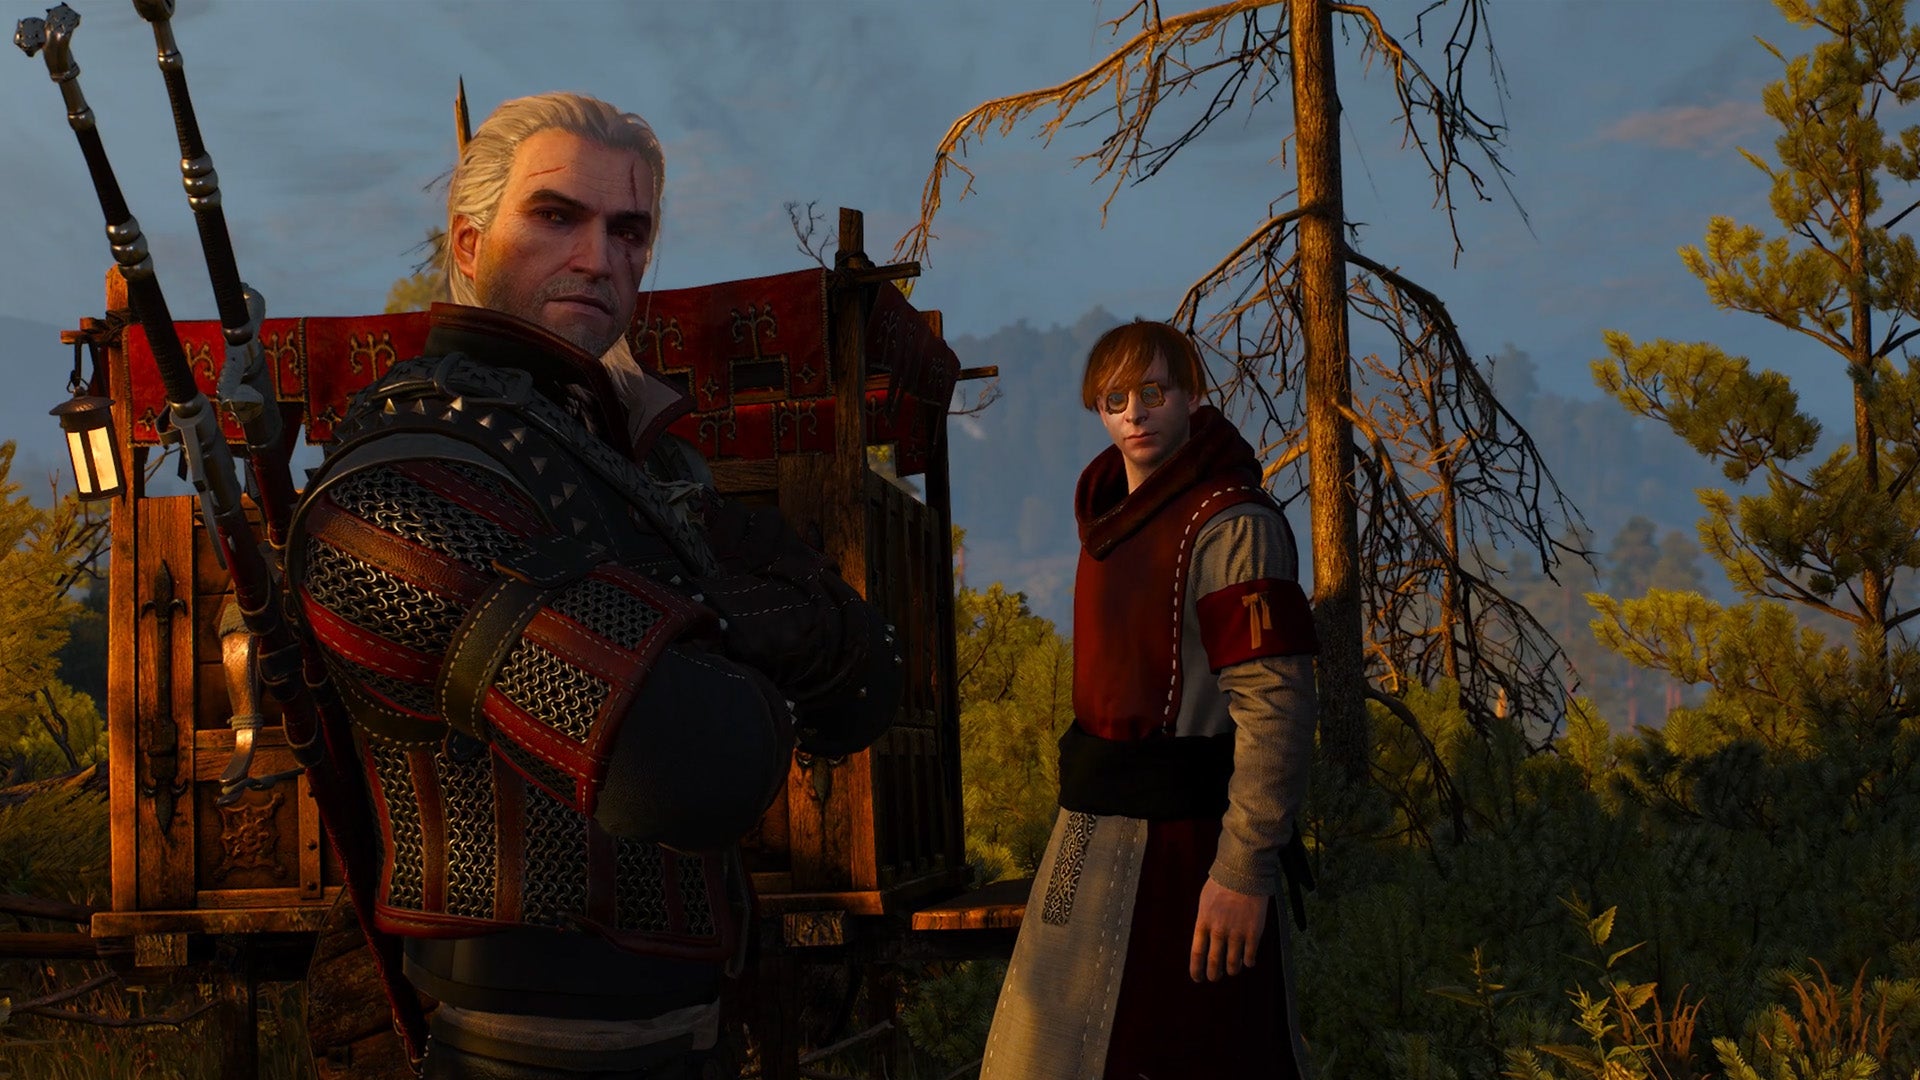 How to get the Forgotten Wolf armor - The Witcher 3: Wild Hunt